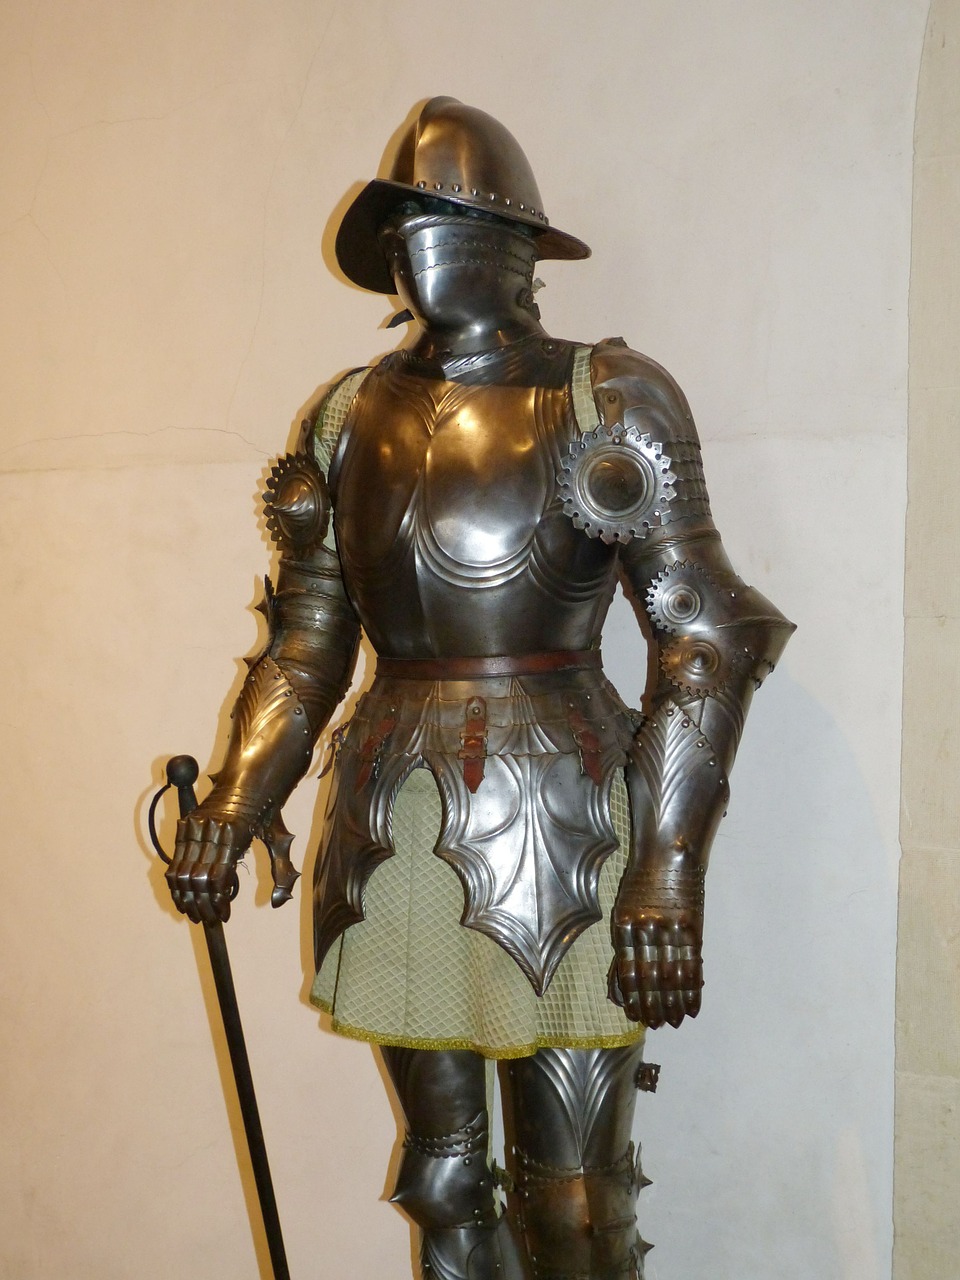 knight armor middle ages free photo